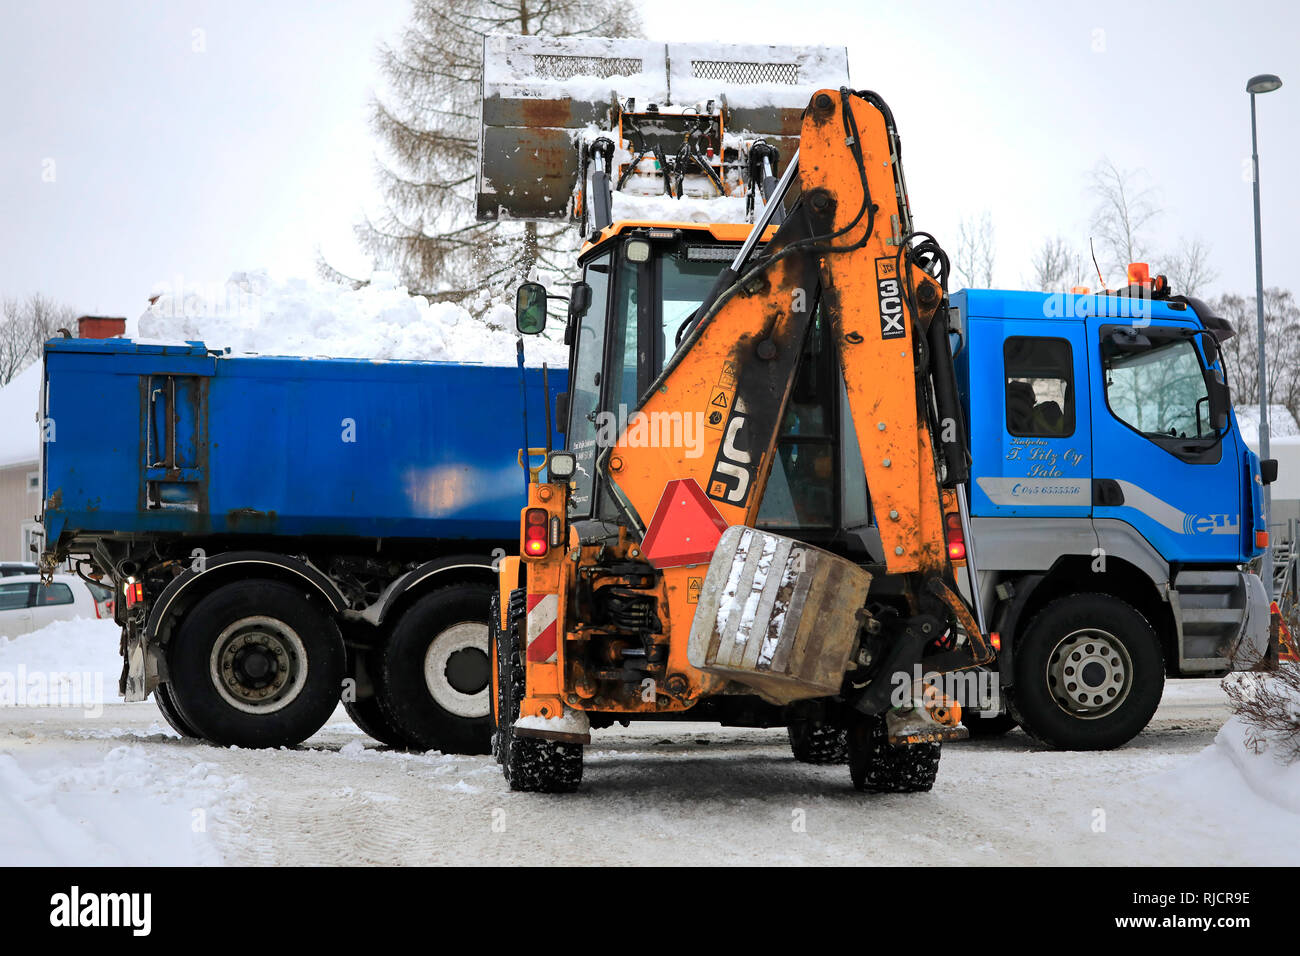 Salo, Finland - February 2, 2019: JCB loader loads snow onto blue Sisu dump truck trailer to be transported to a snow dumping area. Stock Photo